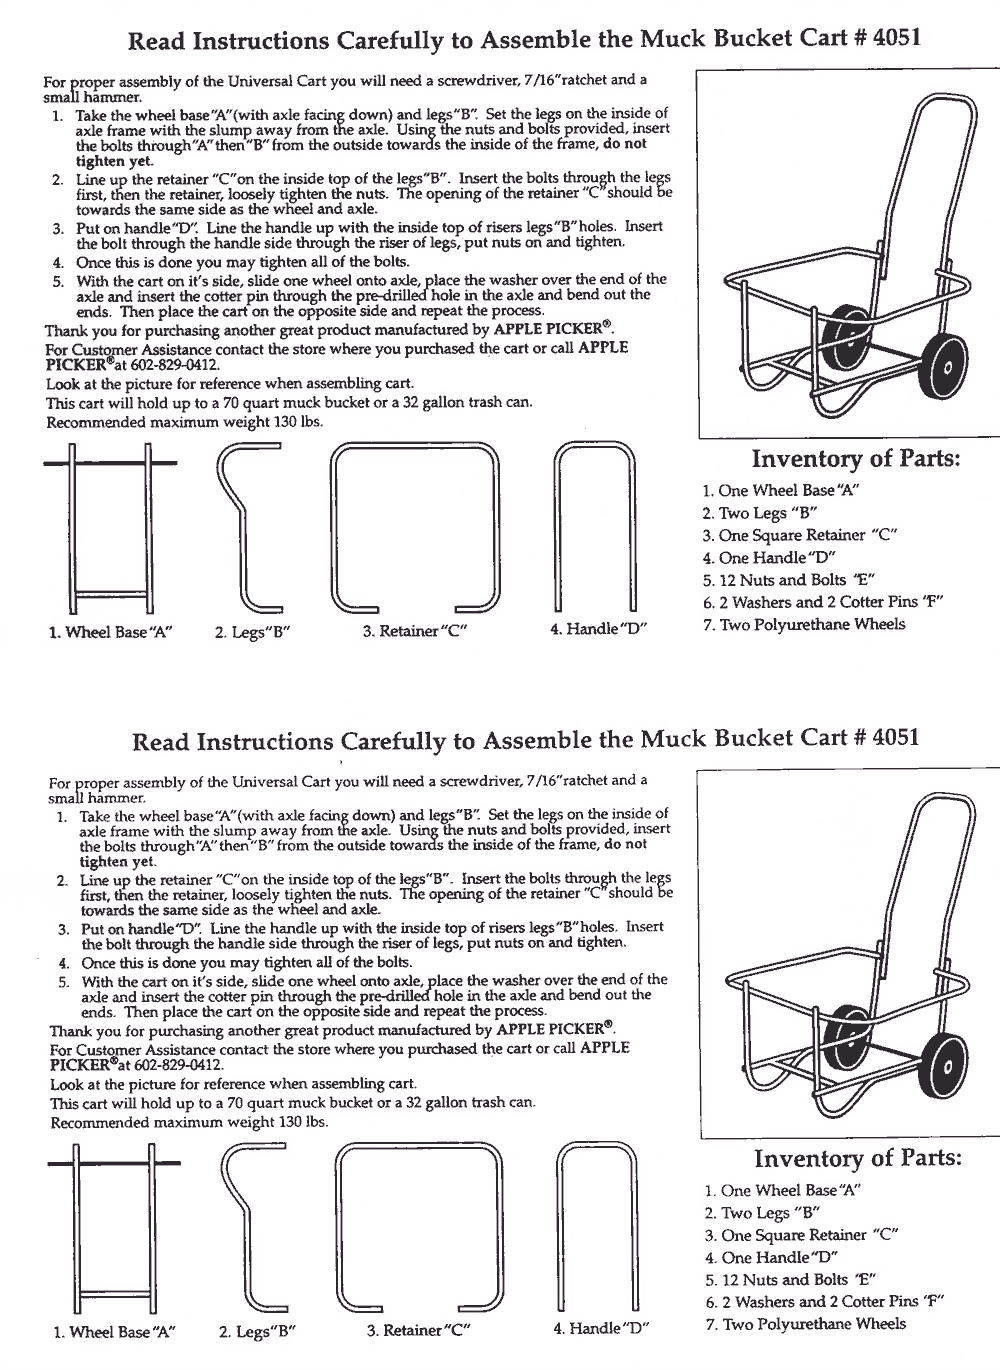 Sizing Chart for Muck Bucket Cart